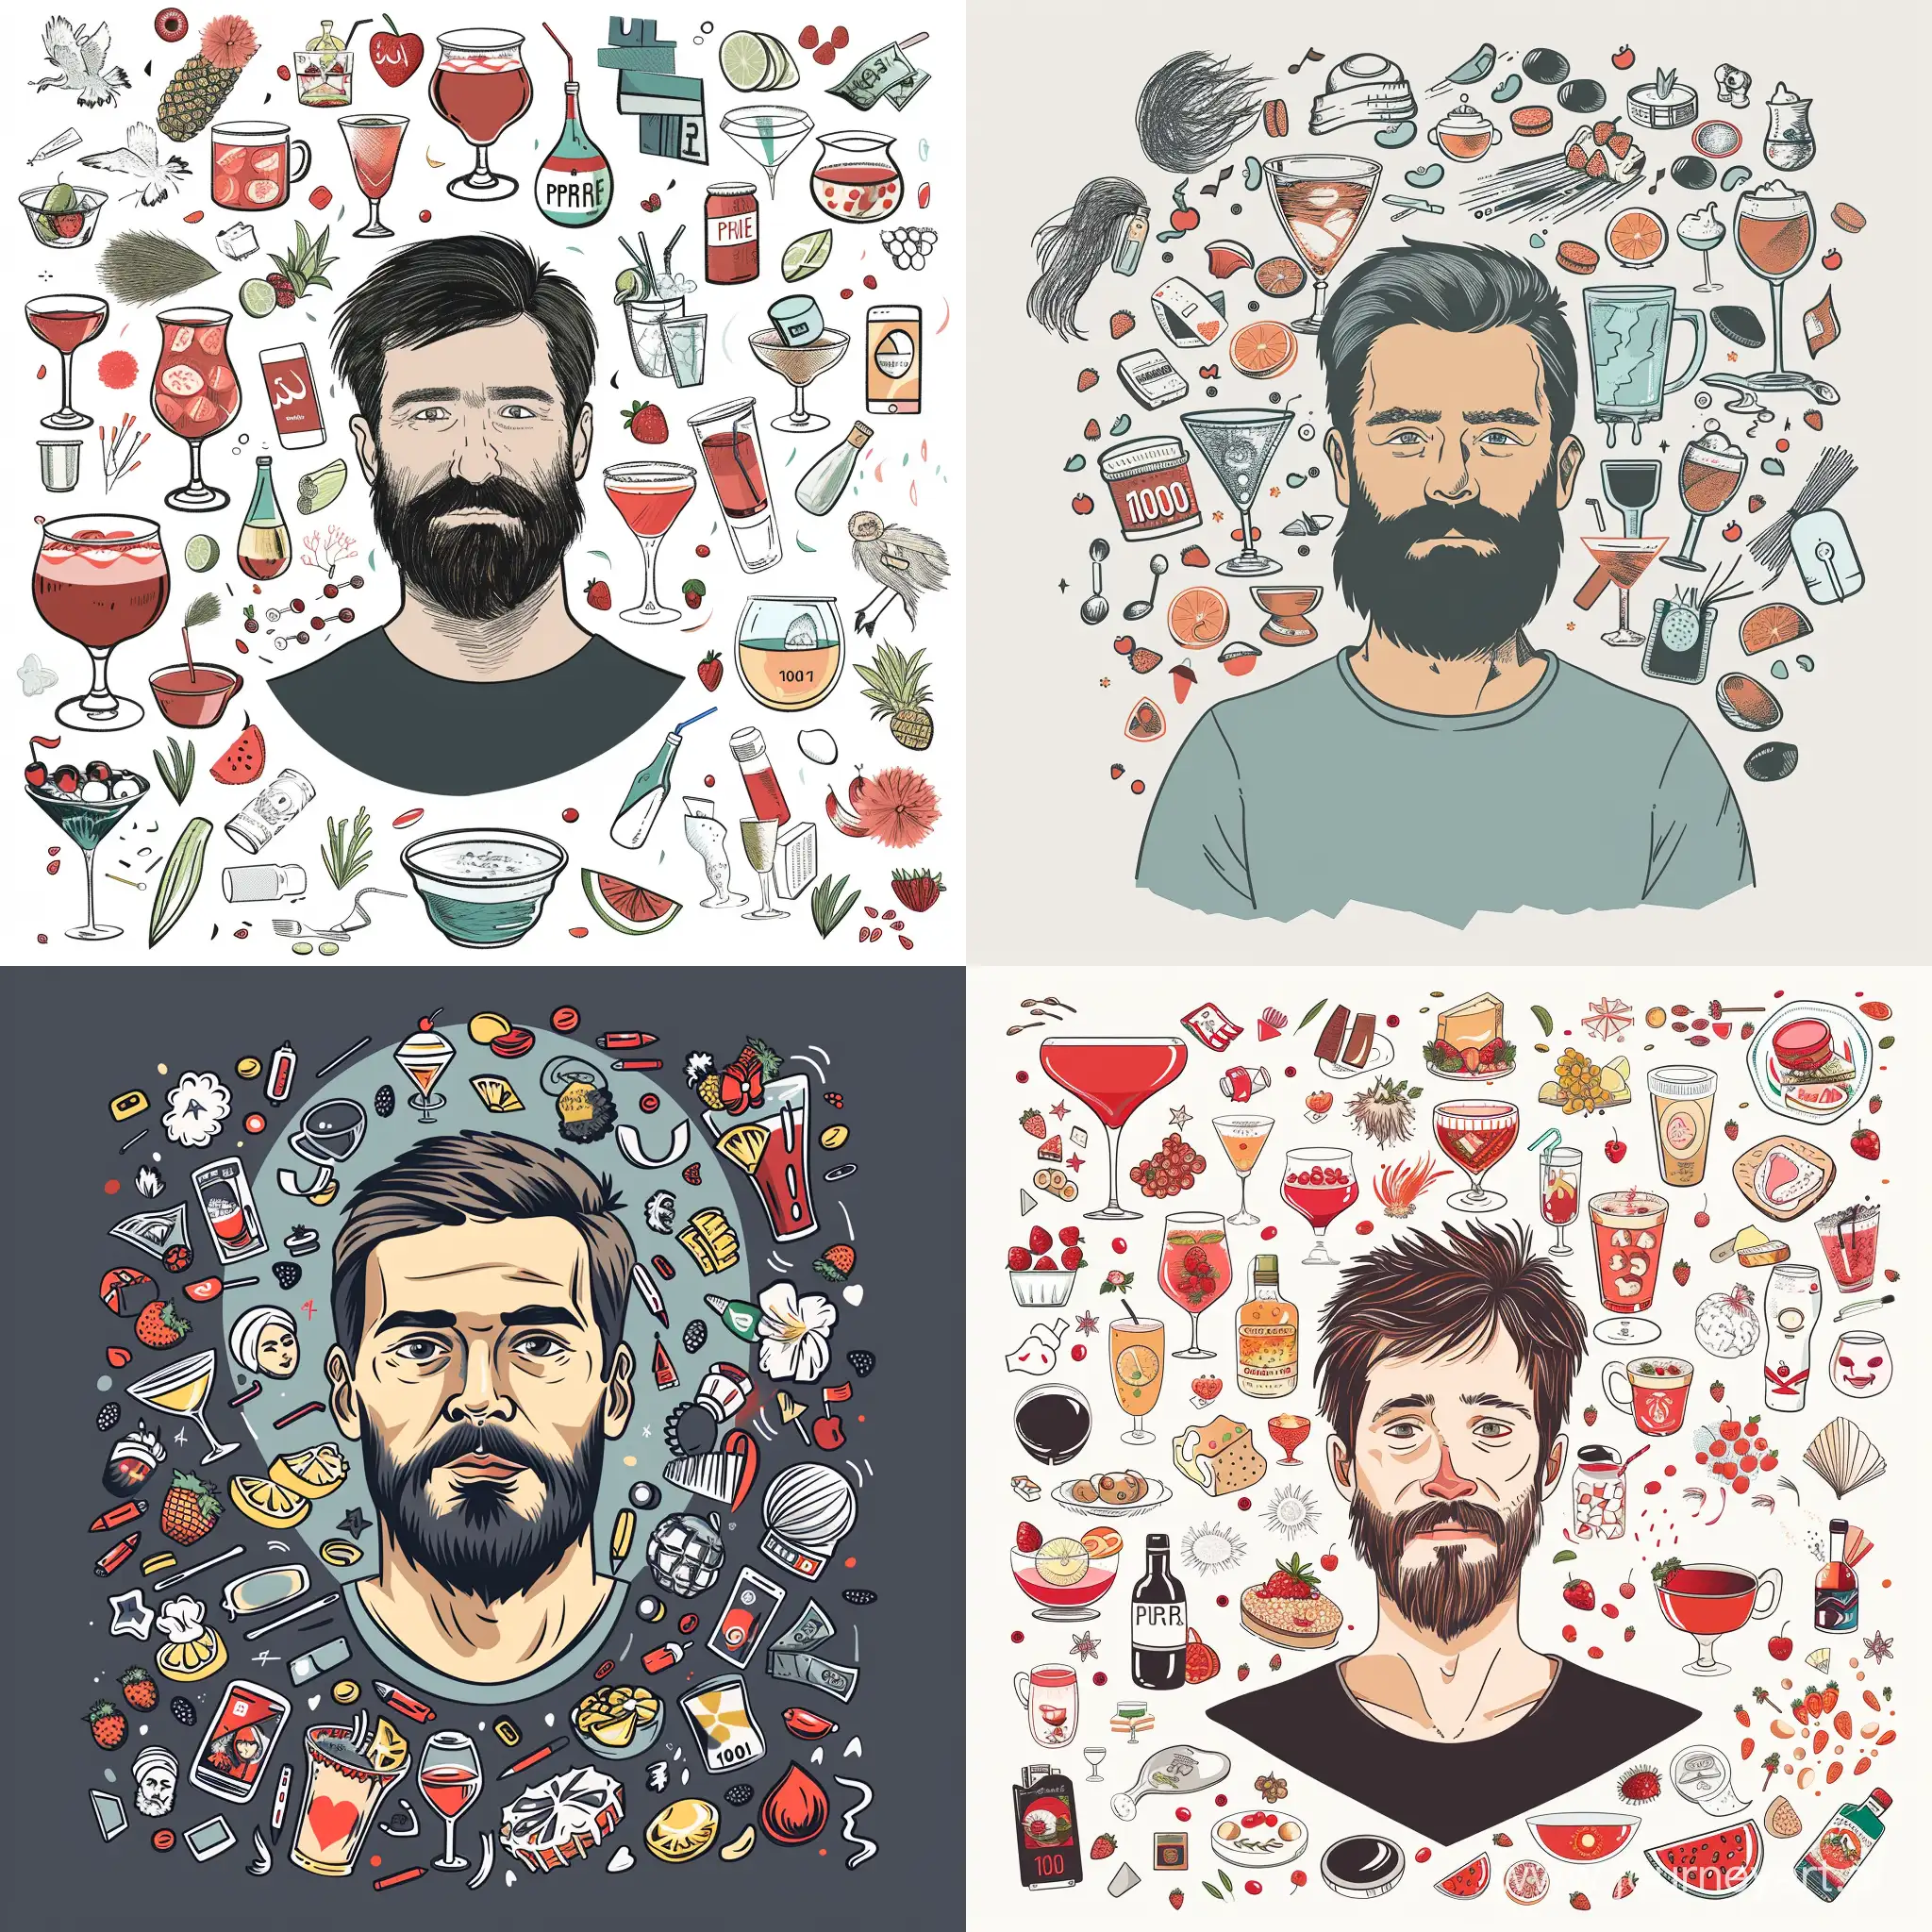 Russianthemed-Avatar-Bearded-Man-Amidst-Cultural-Symbols-Cocktails-and-Divorce